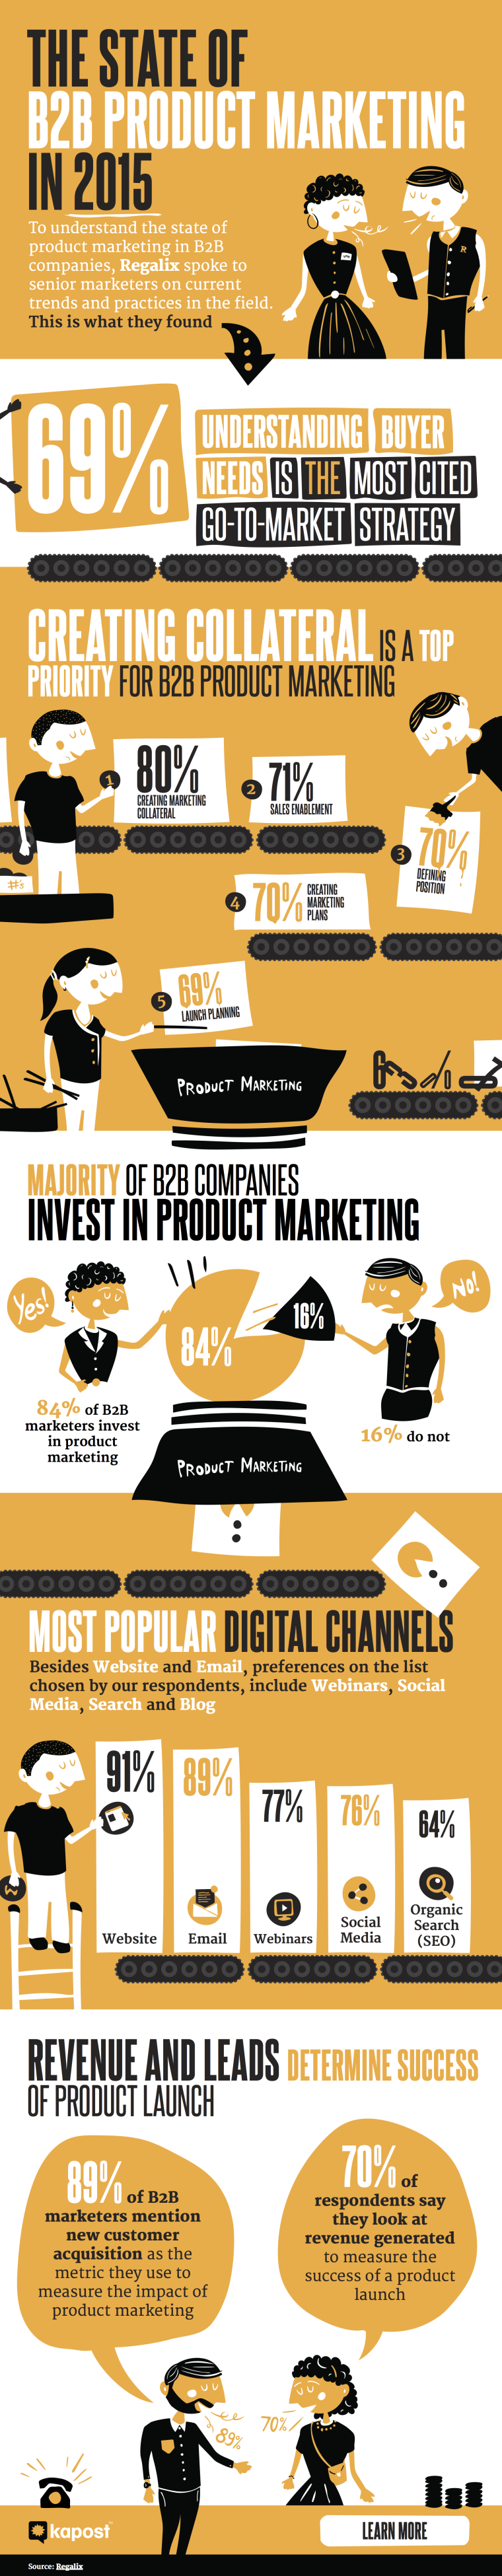 infographic_-_the_state_of_b2b_product_marketing